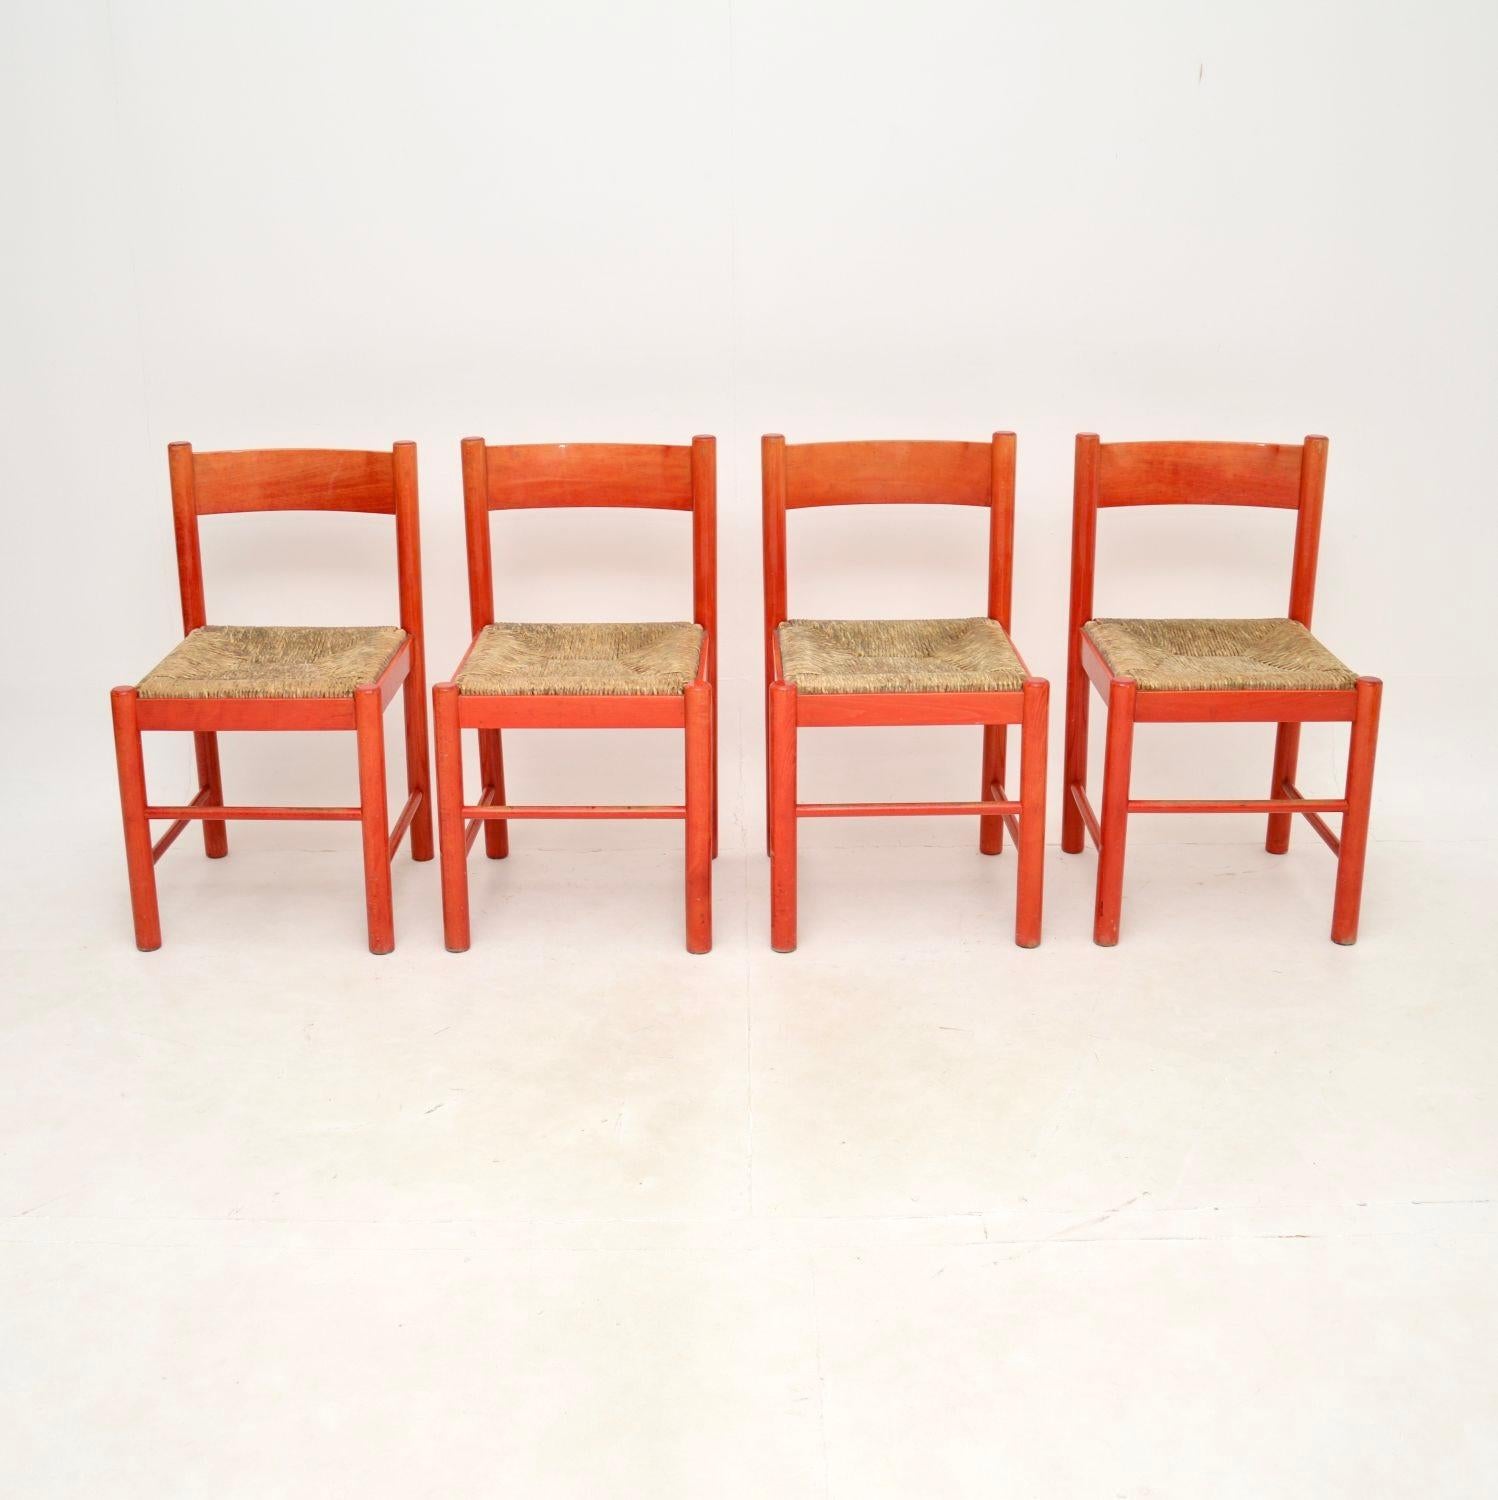 A stylish and very well made set of four vintage Italian Carimate style dining chairs. They are very much in the manner of the Carimate chair designed by Vico Magistretti. These were made in Italy, they date from the 1960-70’s.

The quality is